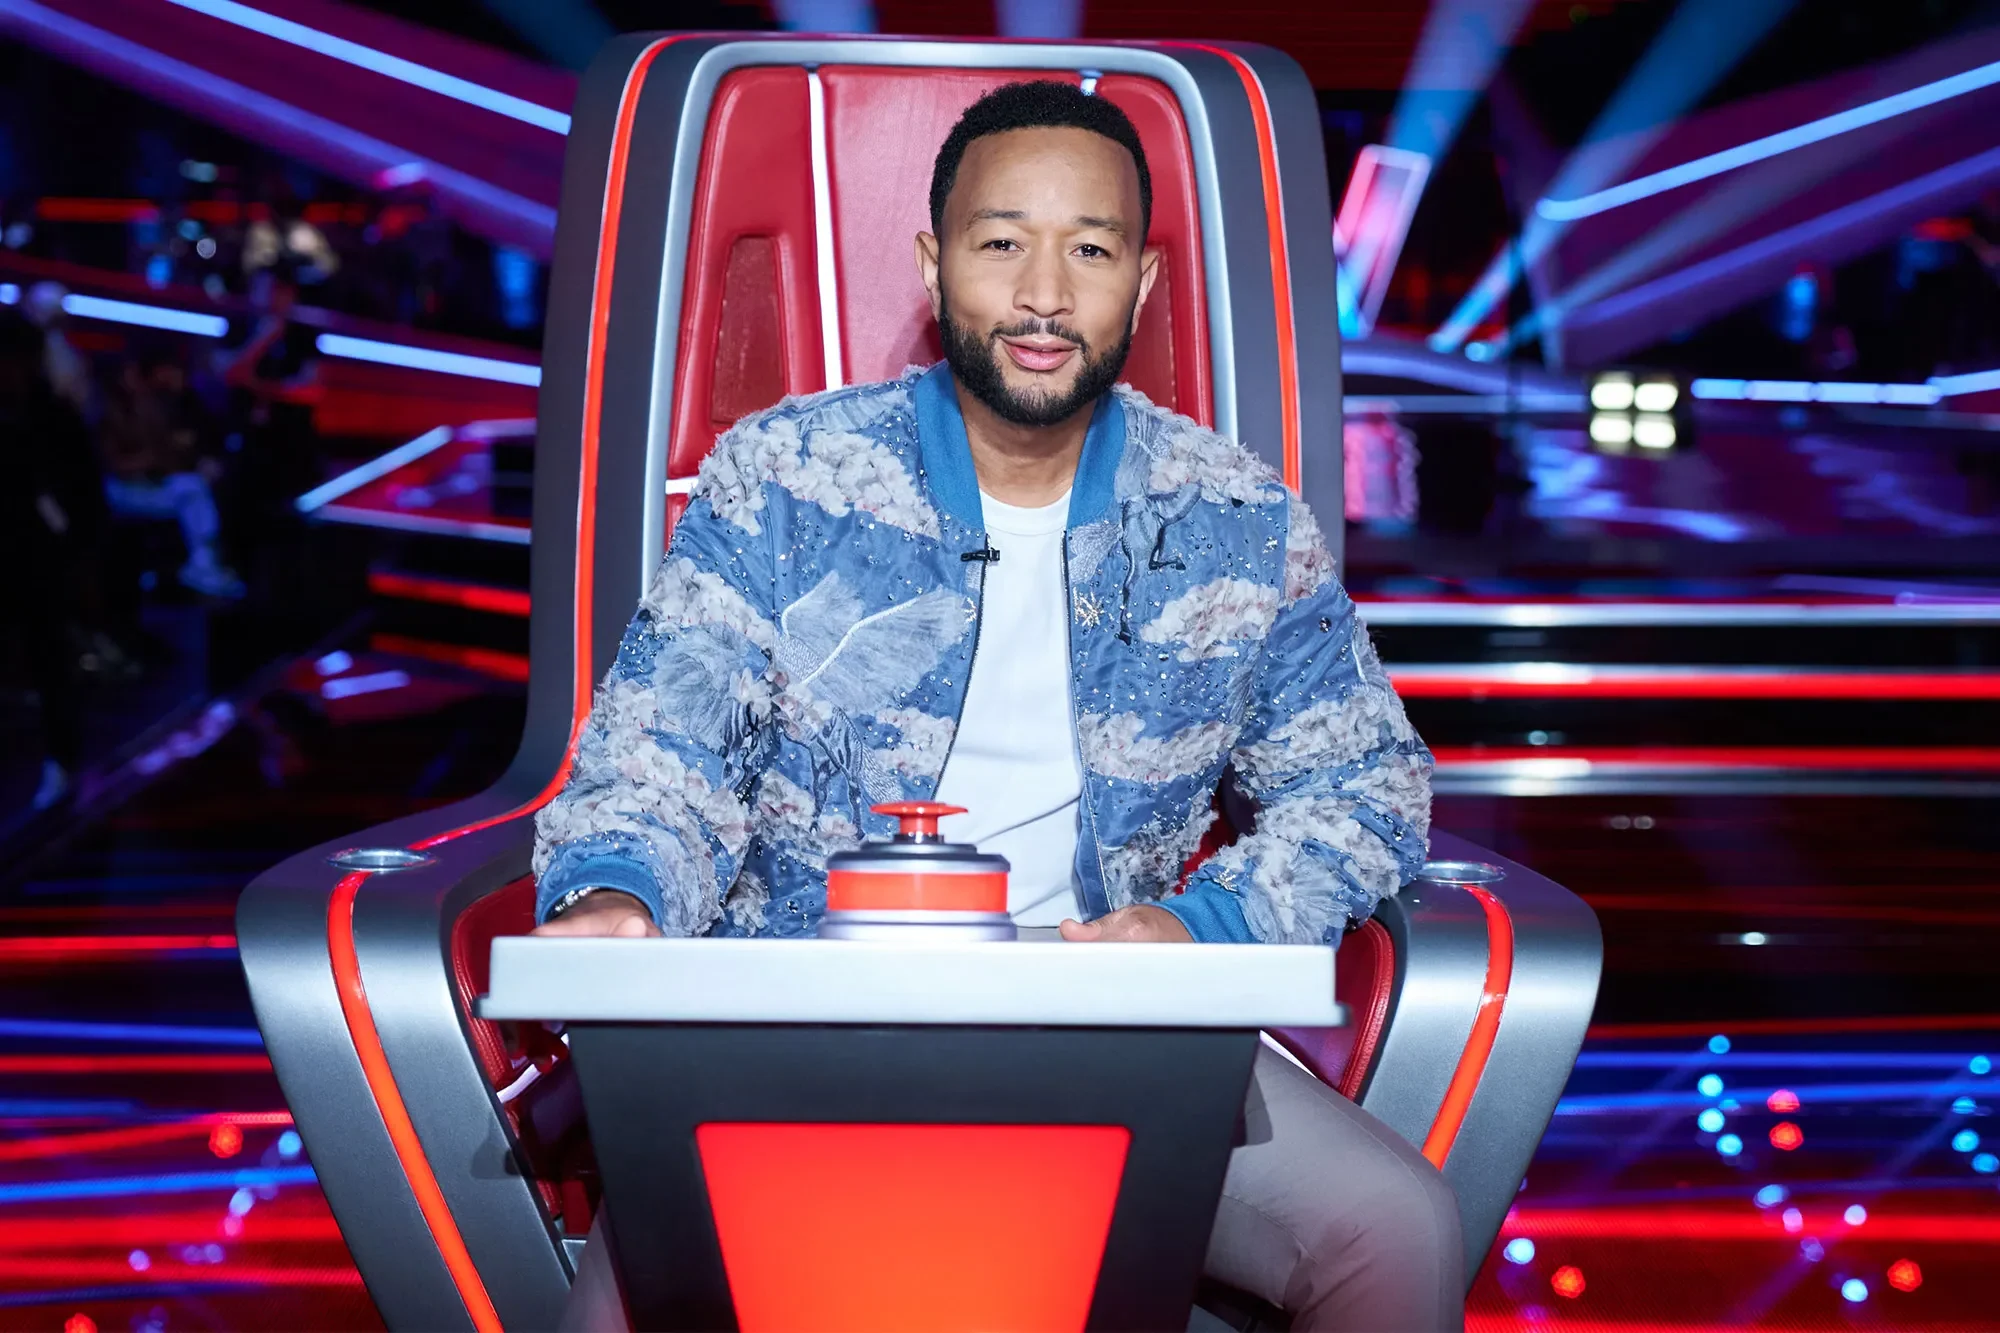 John Legend was supposed to perform with the former DSDS contestant at the premiere of the 24th season of The Voice